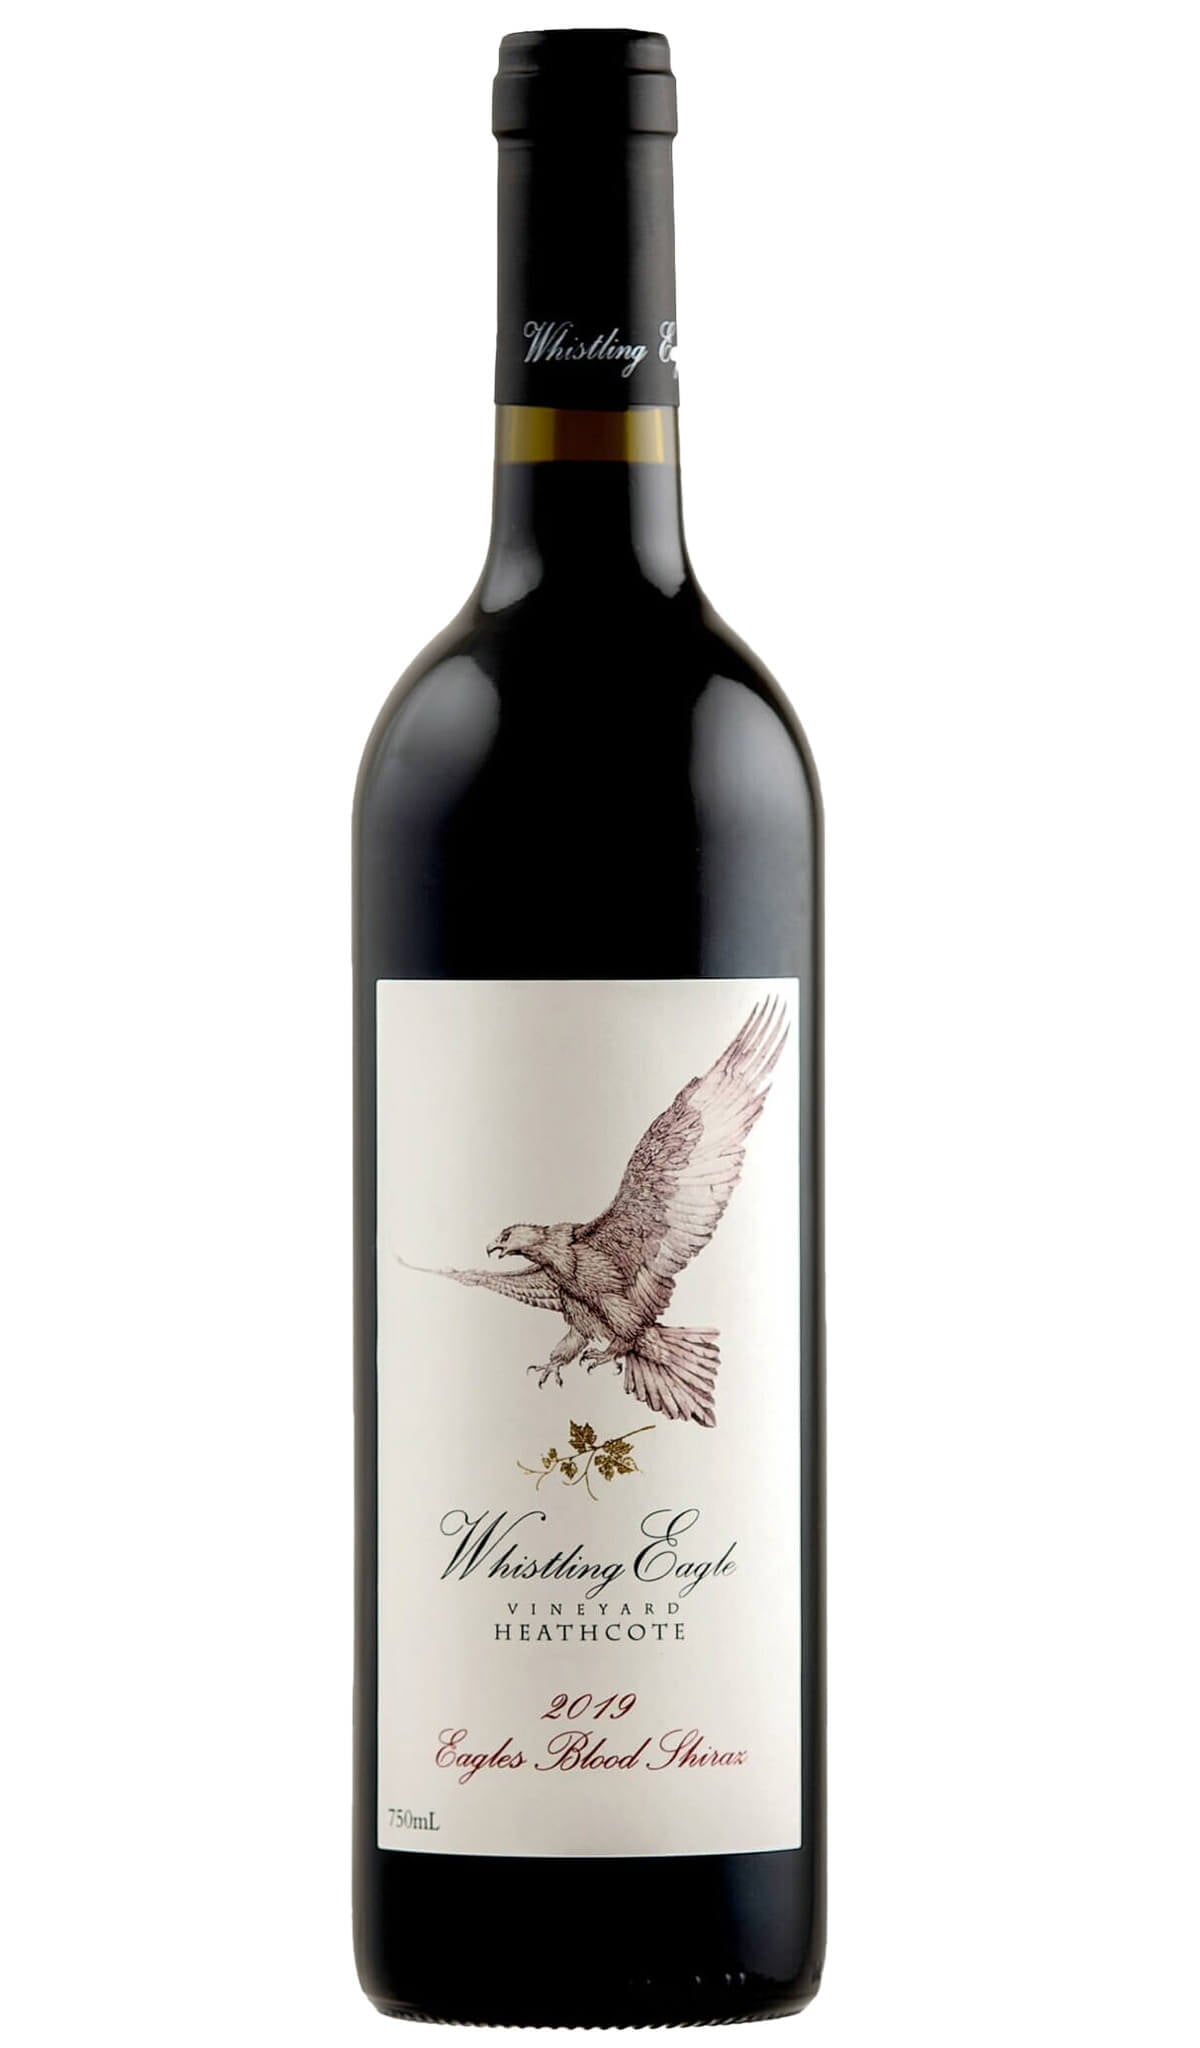 Find out more or buy Whistling Eagle Eagles Blood Heathcote Shiraz 2019 online at Wine Sellers Direct - Australia’s independent liquor specialists.